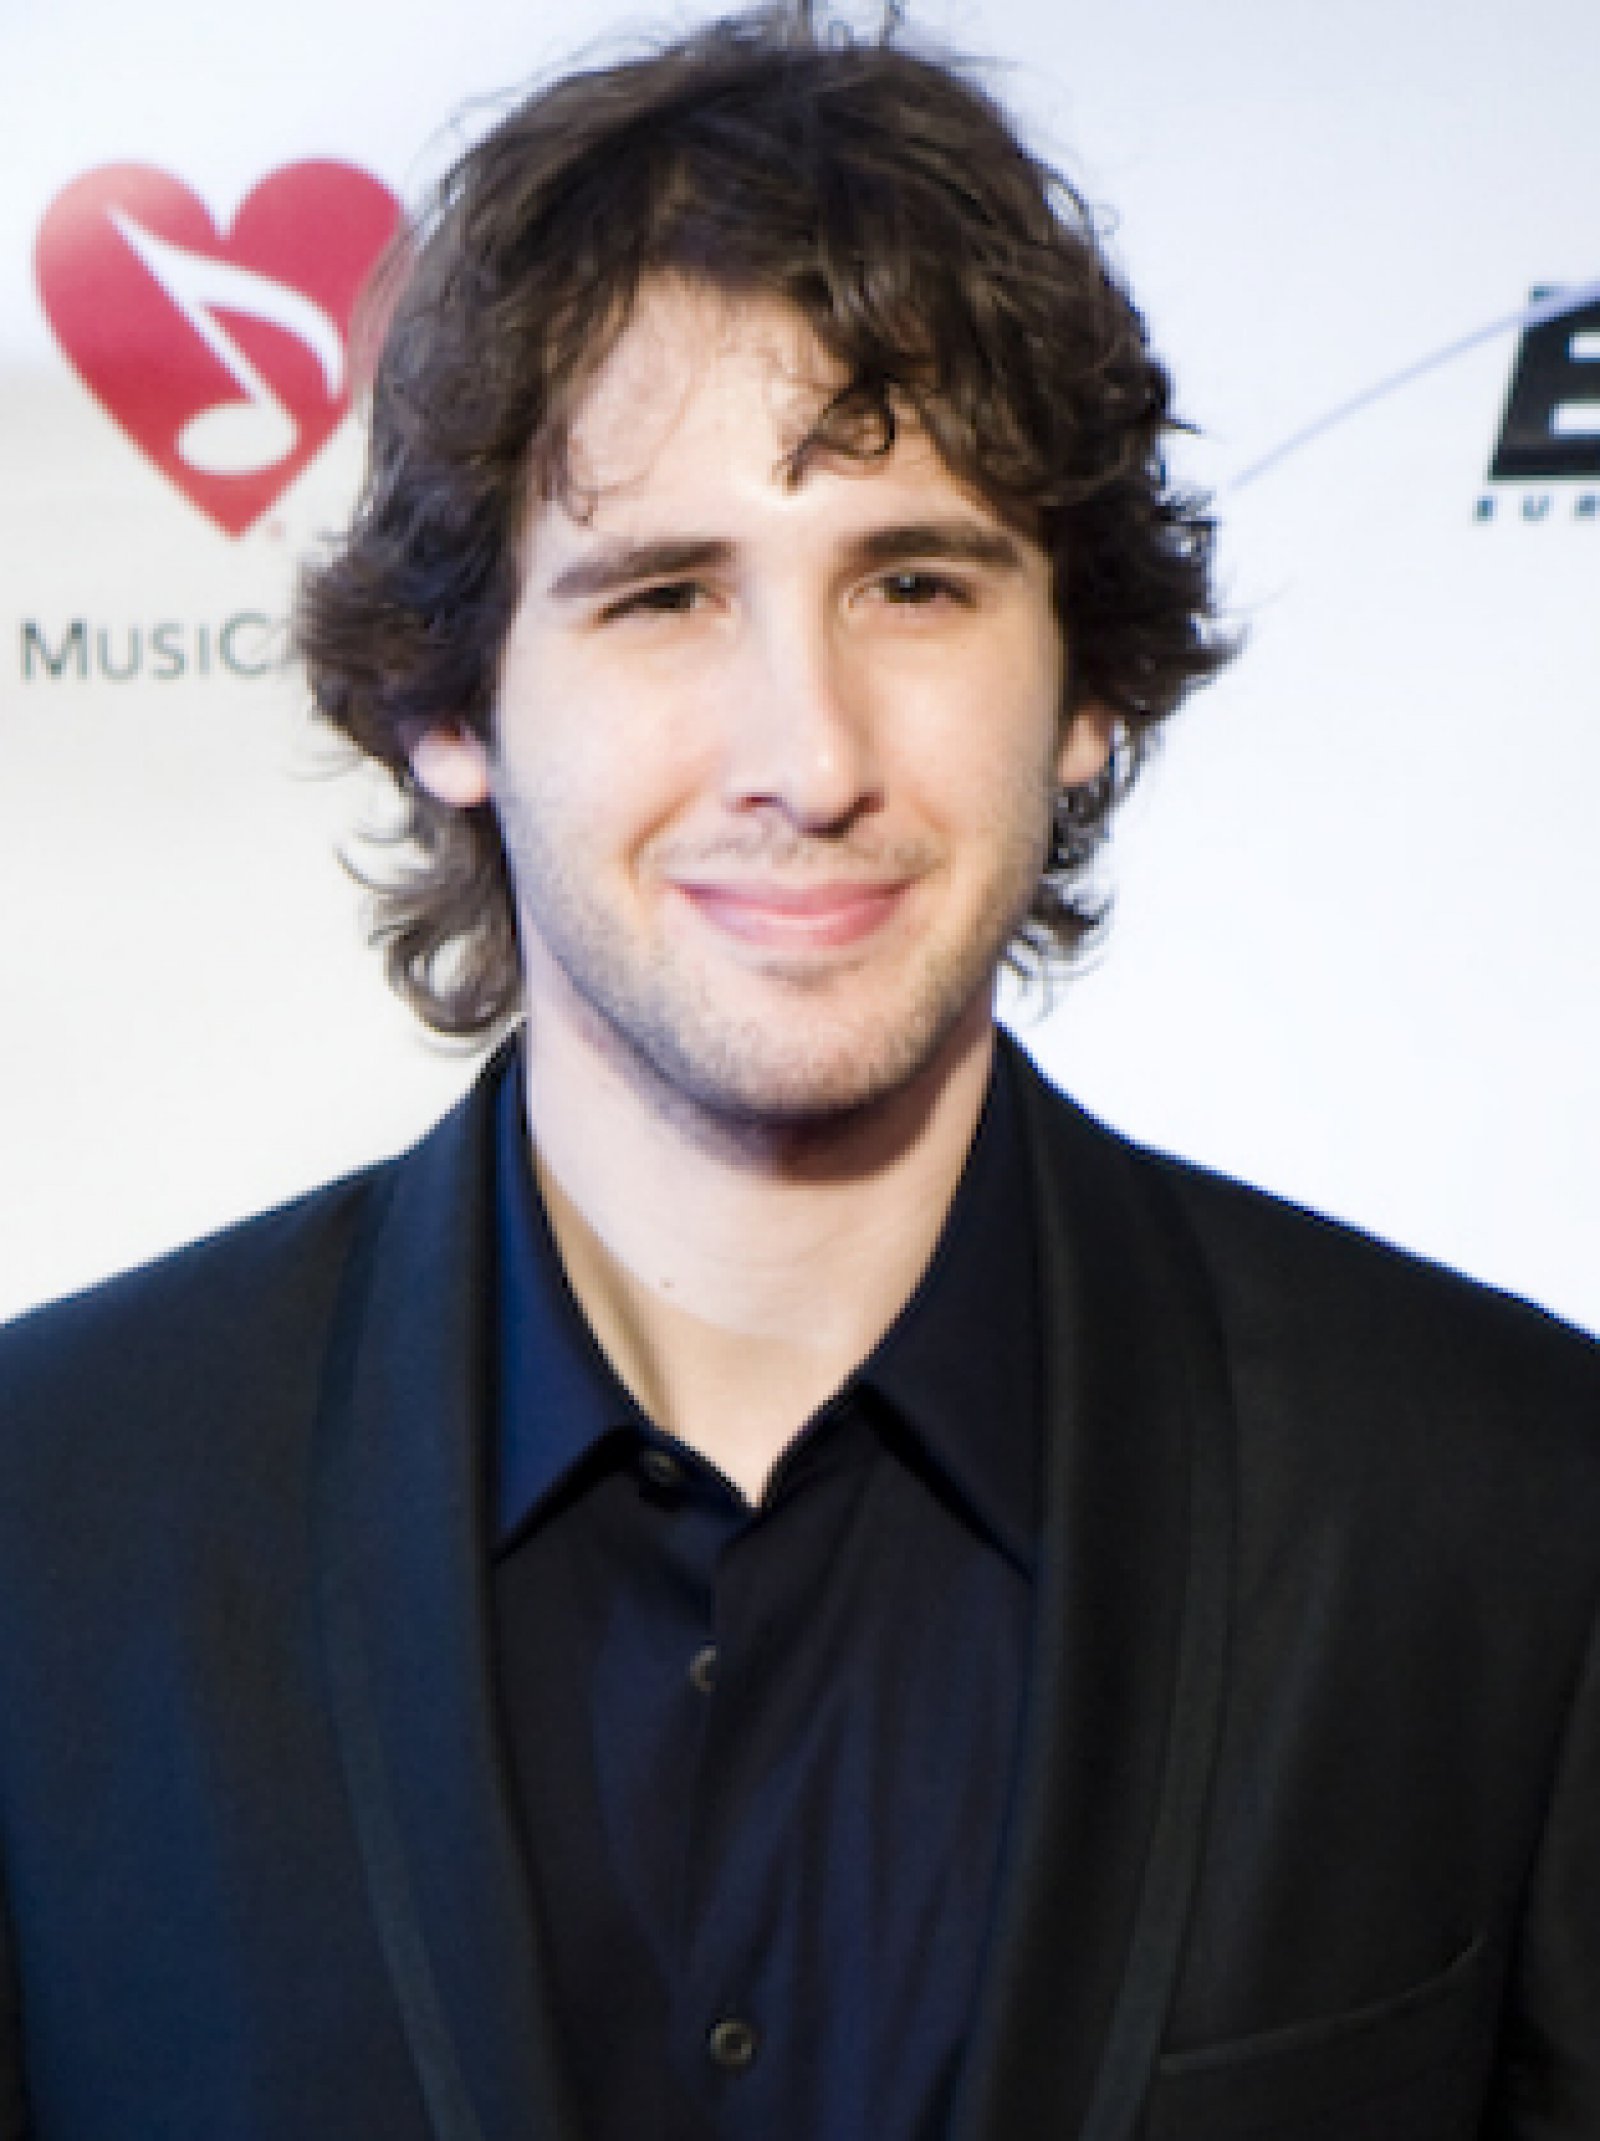 Josh Groban to host ABC's 'Rising Star,' which will premiere June 22